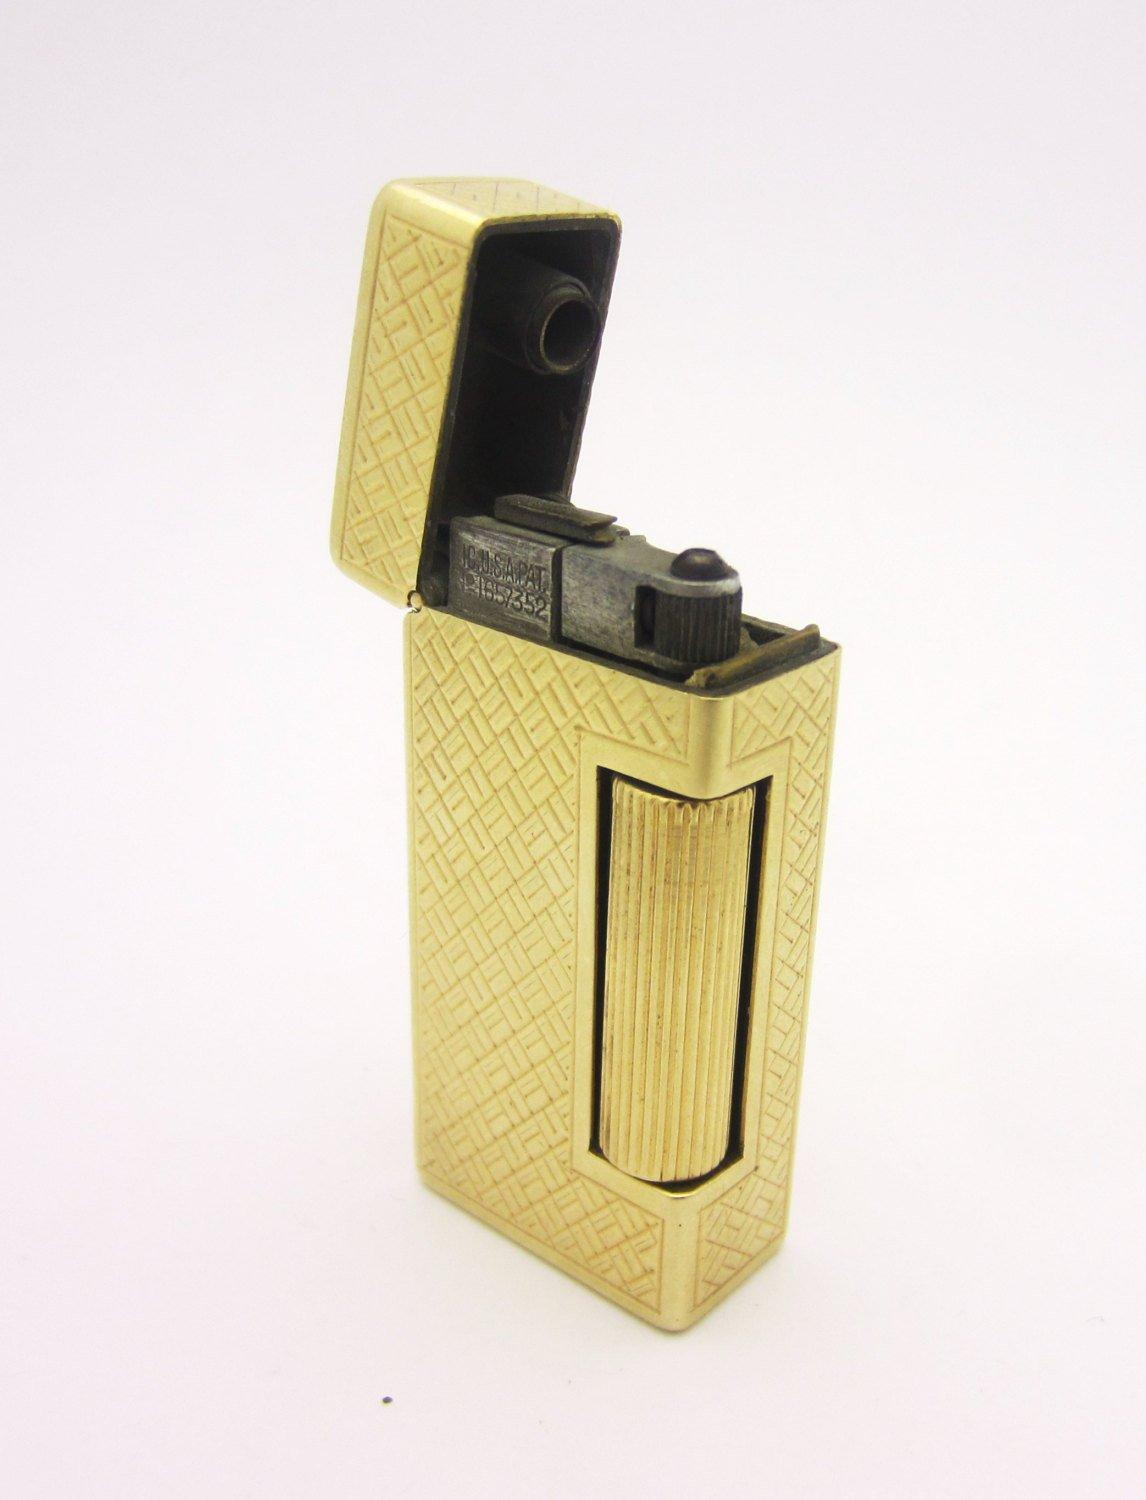 This vintage Dunhill lighter features a beautifully textured 14k yellow gold case. The case is engraved with the name 